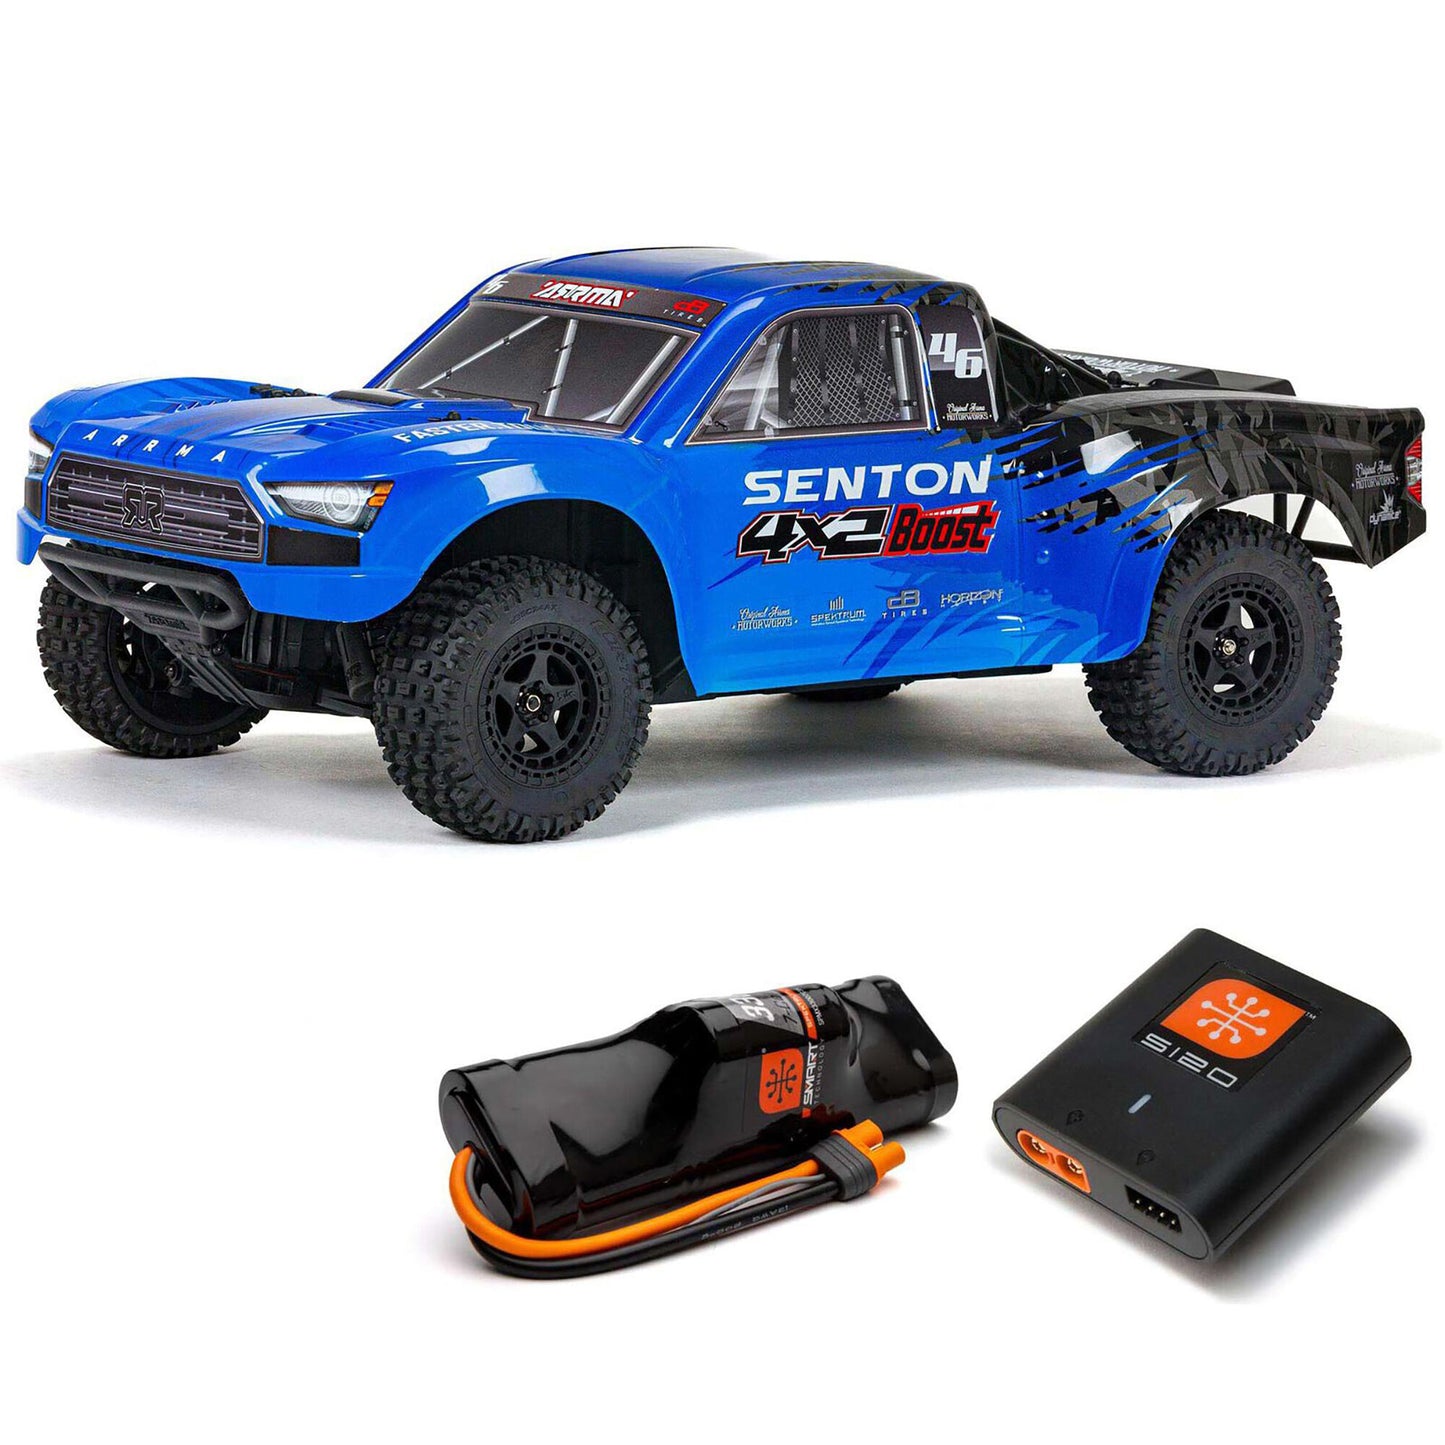 1/10 SENTON 4X2 BOOST MEGA 550 Brushed Short Course Truck RTR with Battery & Charger  Blue